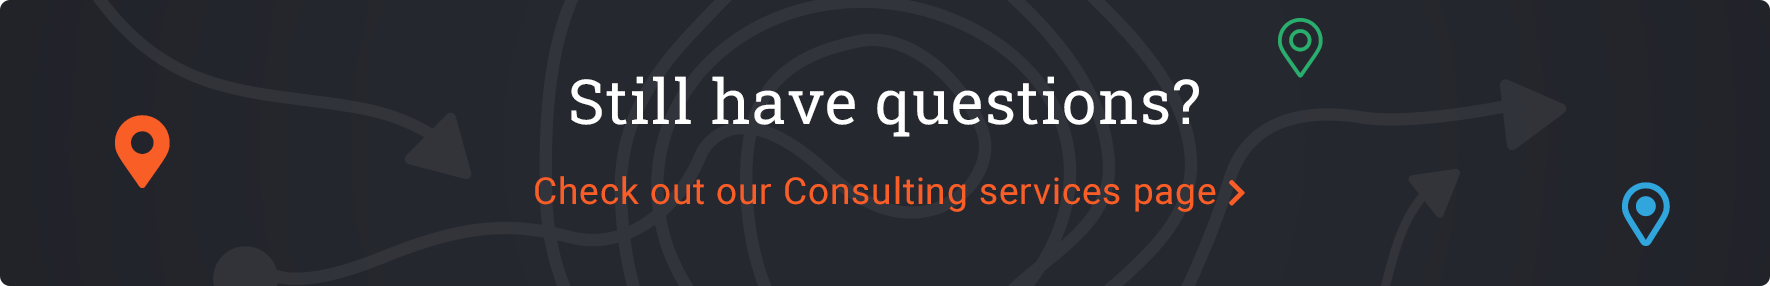 Still have questions? Check out our Consulting services page | Acro Media